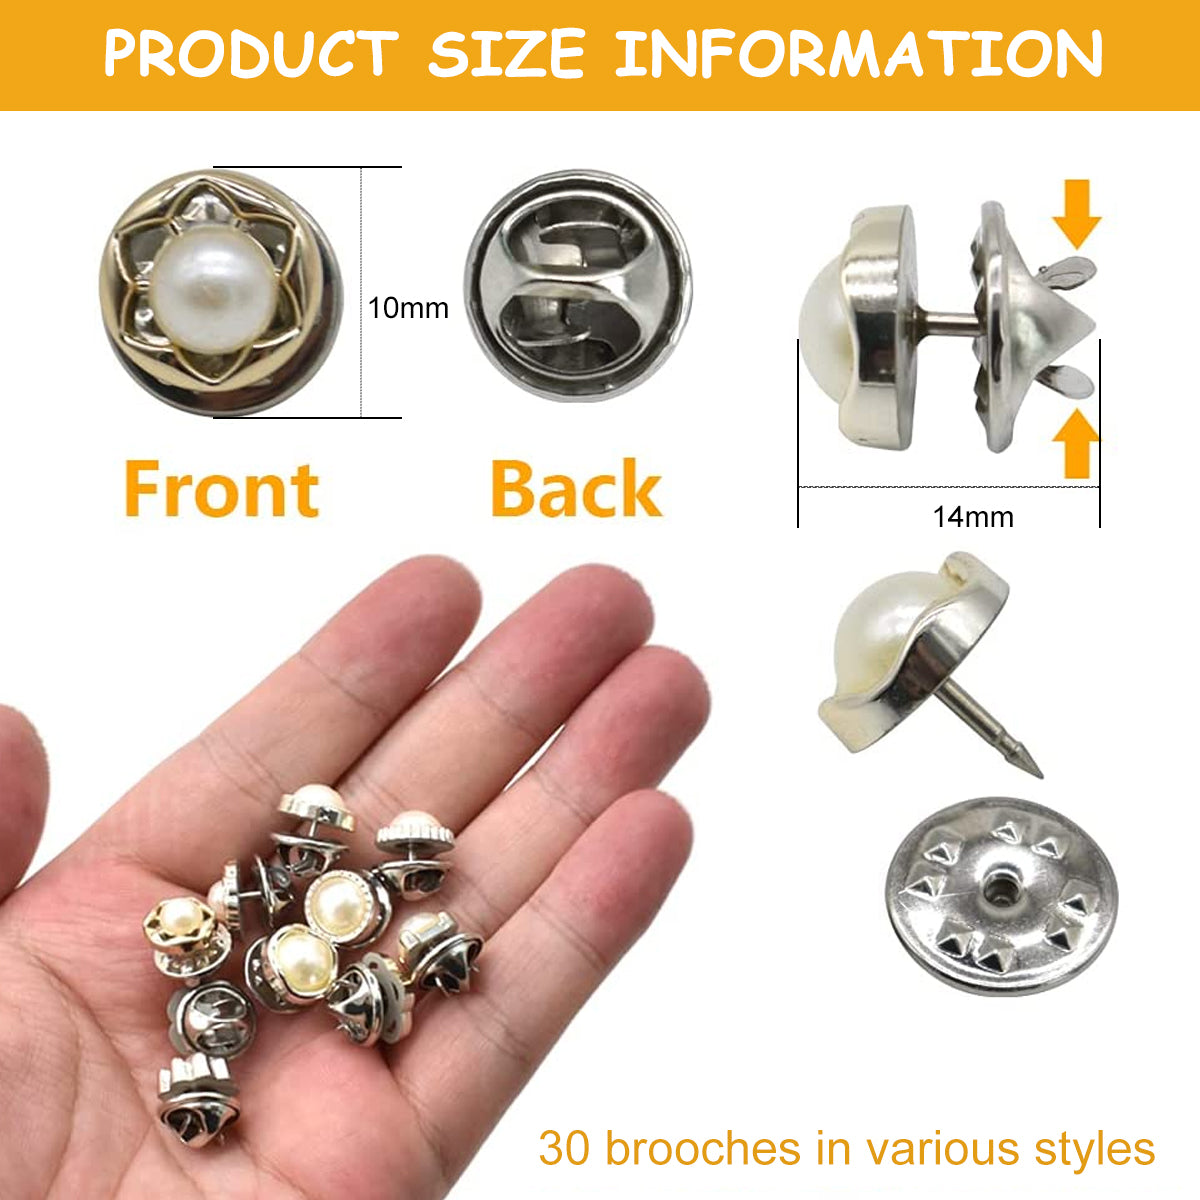 SANNIDHI 30pcs Pearl Buttons Brooch Buttons Cover Up Brooch Pins Mini Safety Shirt Buttons for Cardigan Saree Dress Hats, No Sew & Removable